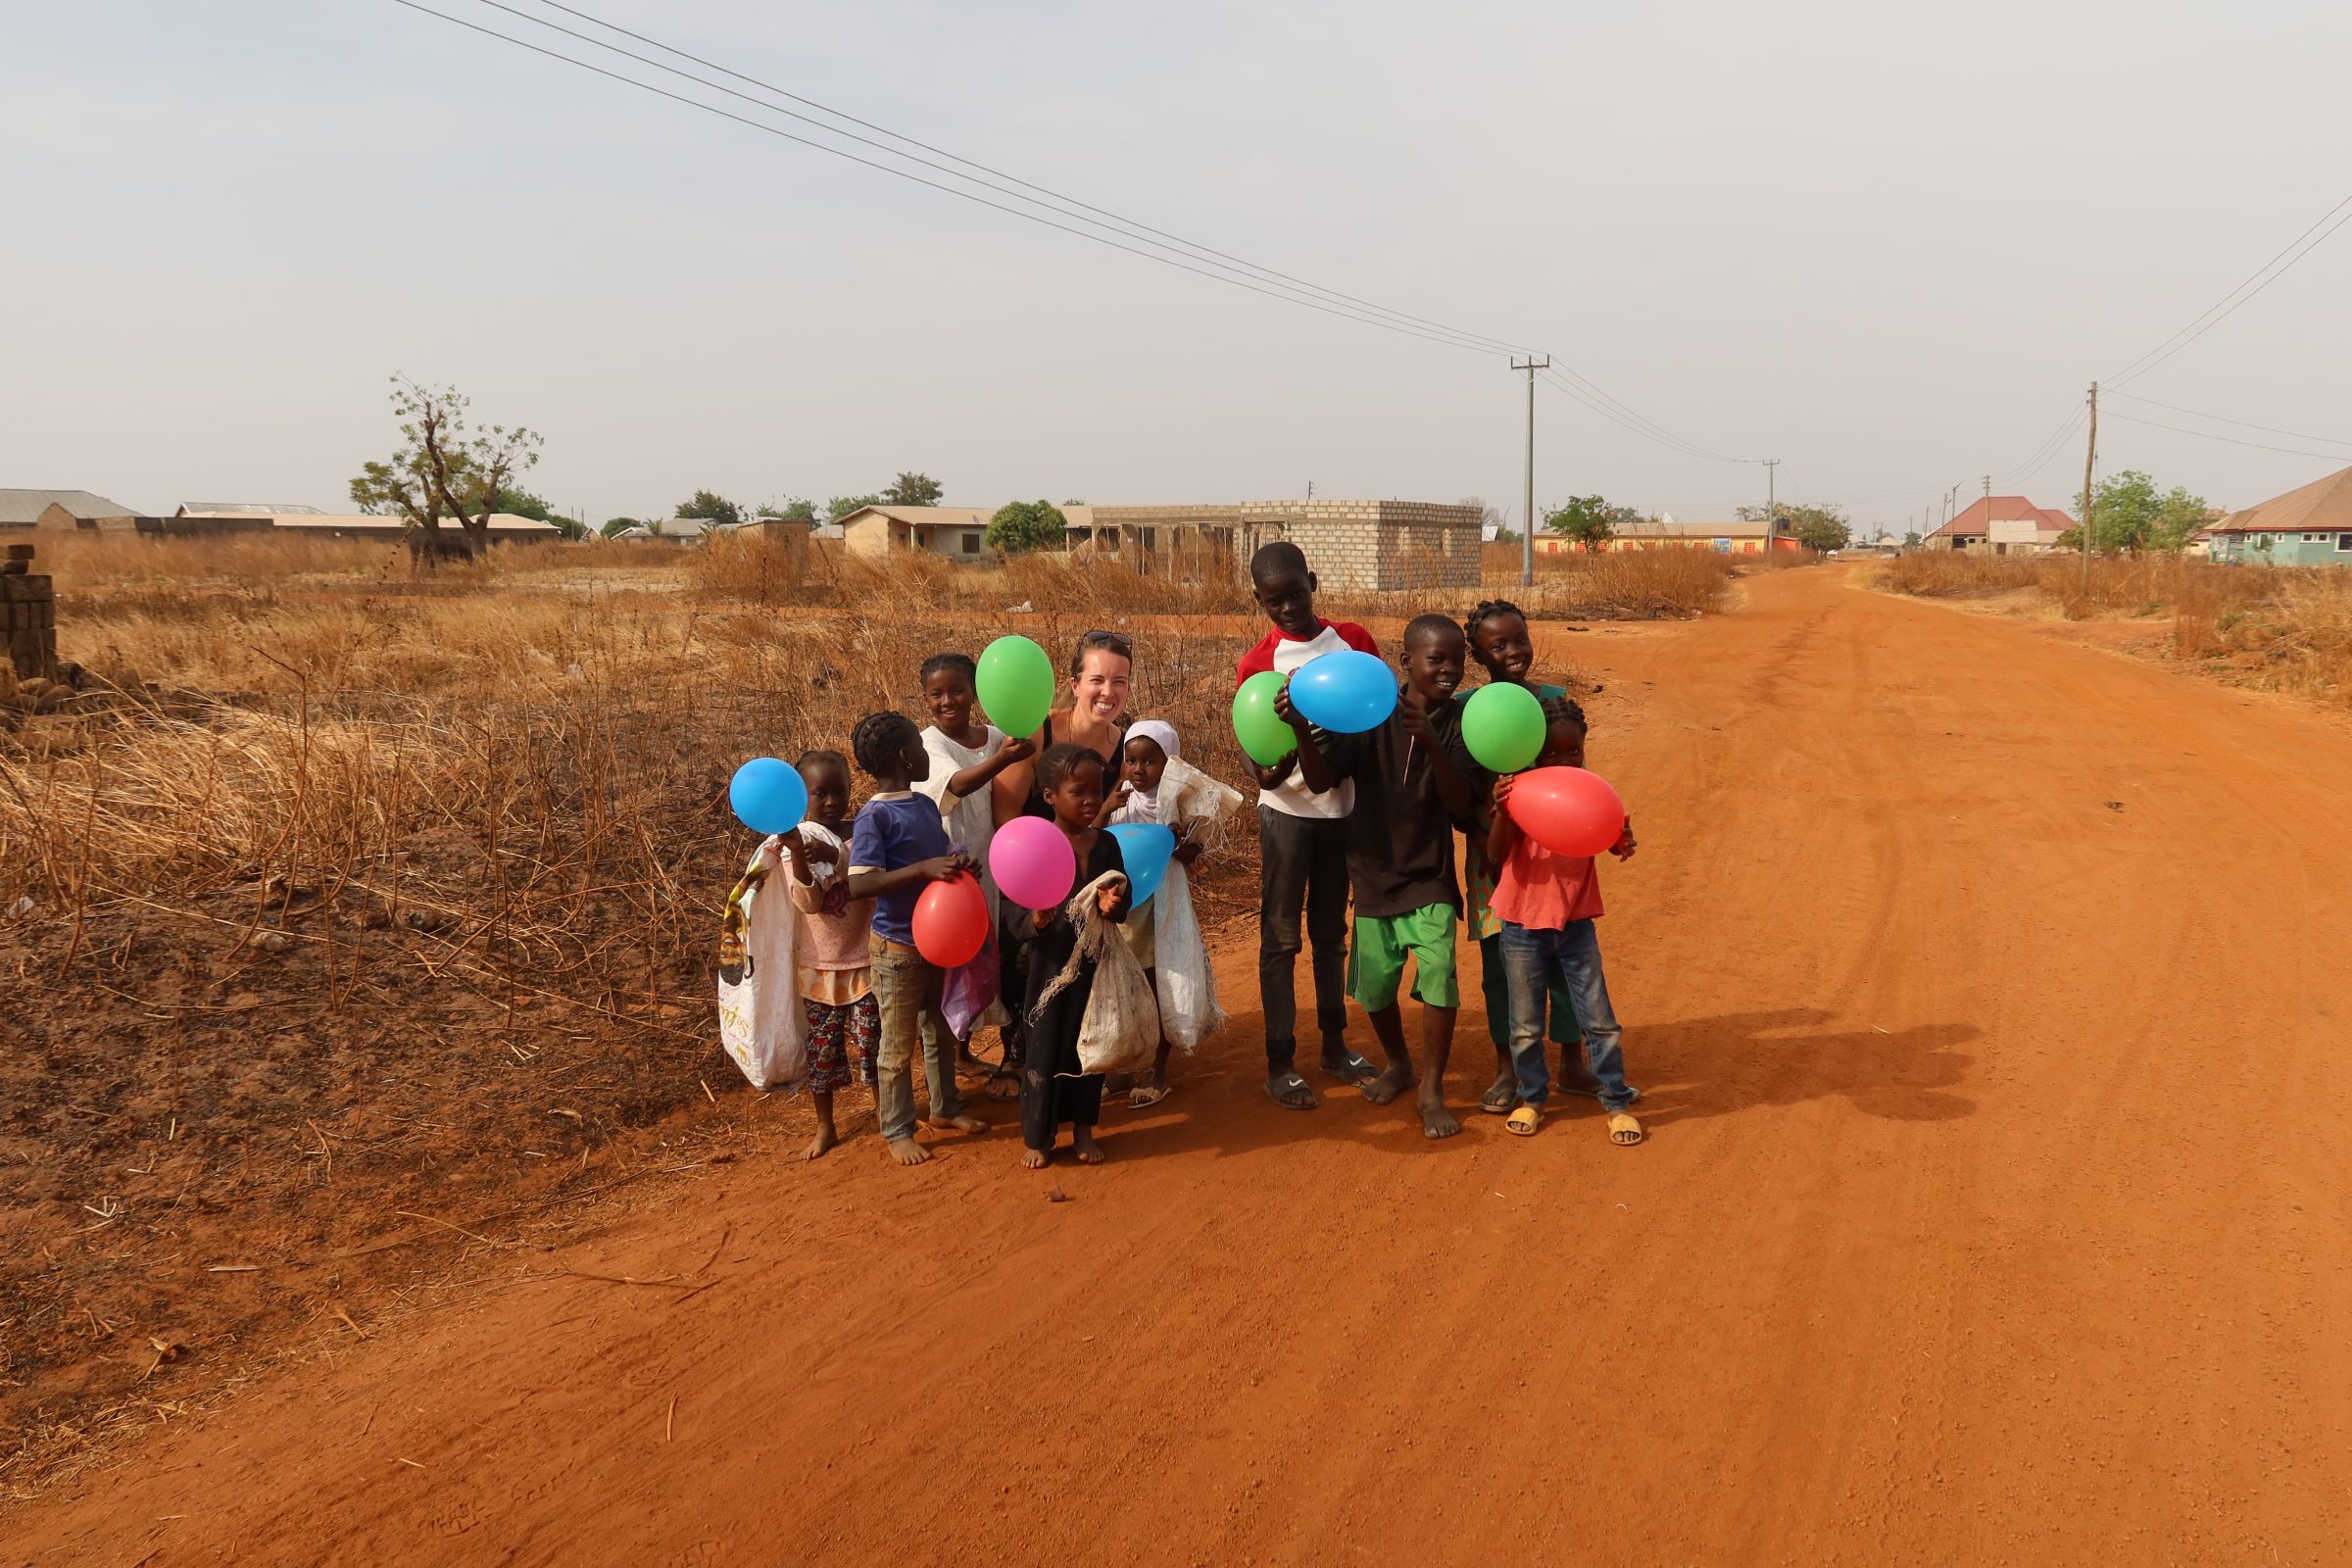 Handing out balloons to children in Tamale, Ghana.